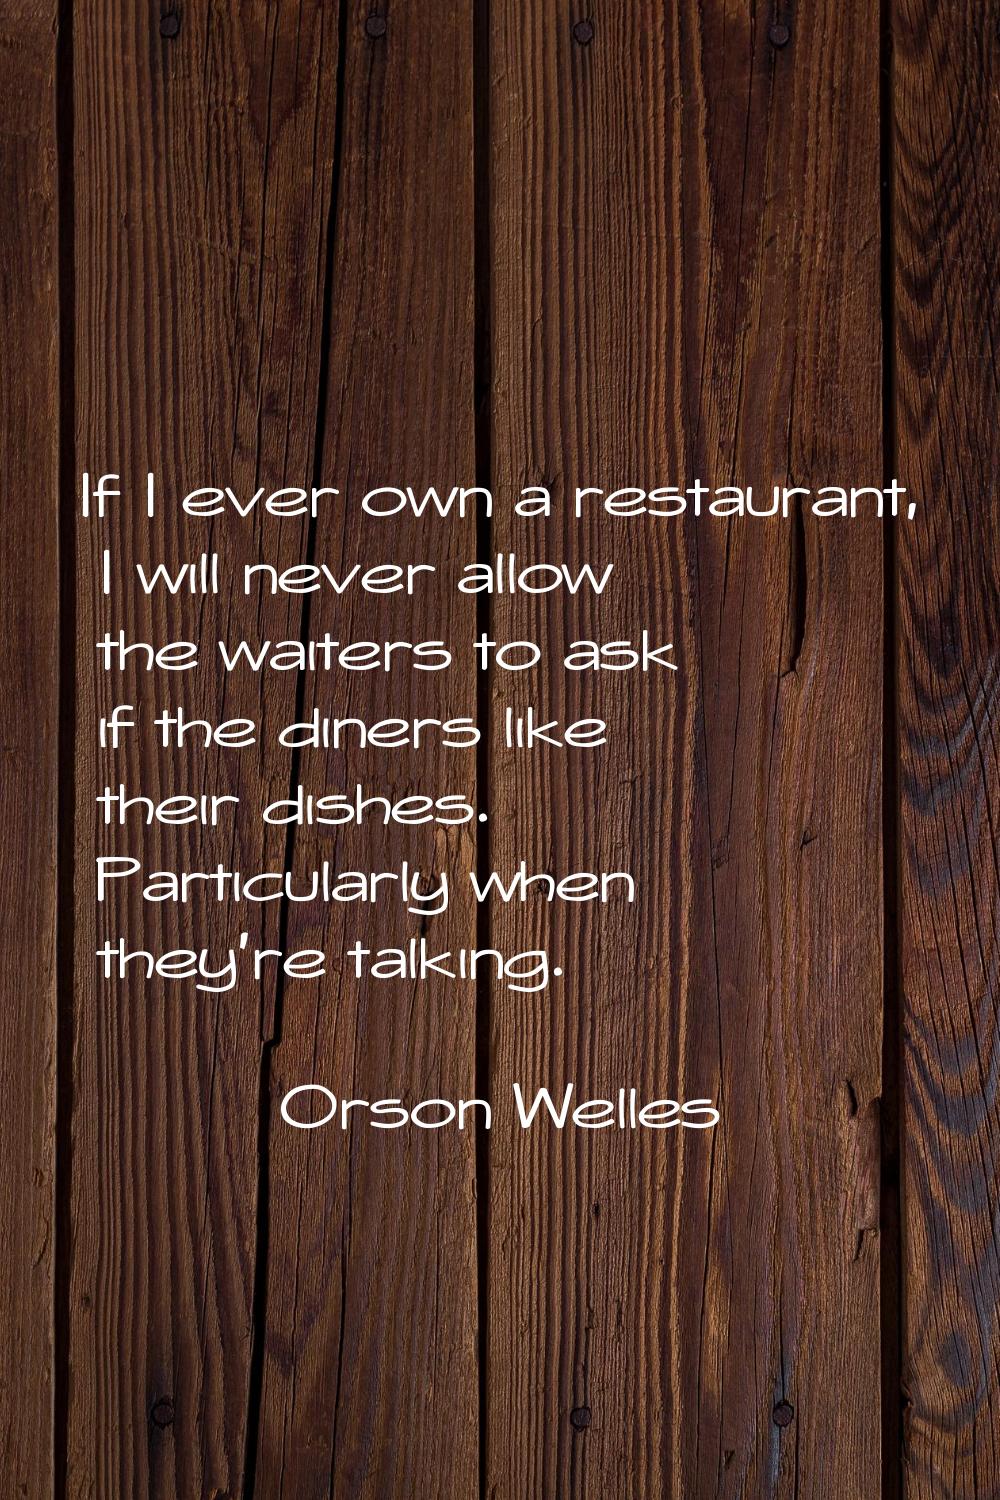 If I ever own a restaurant, I will never allow the waiters to ask if the diners like their dishes. 